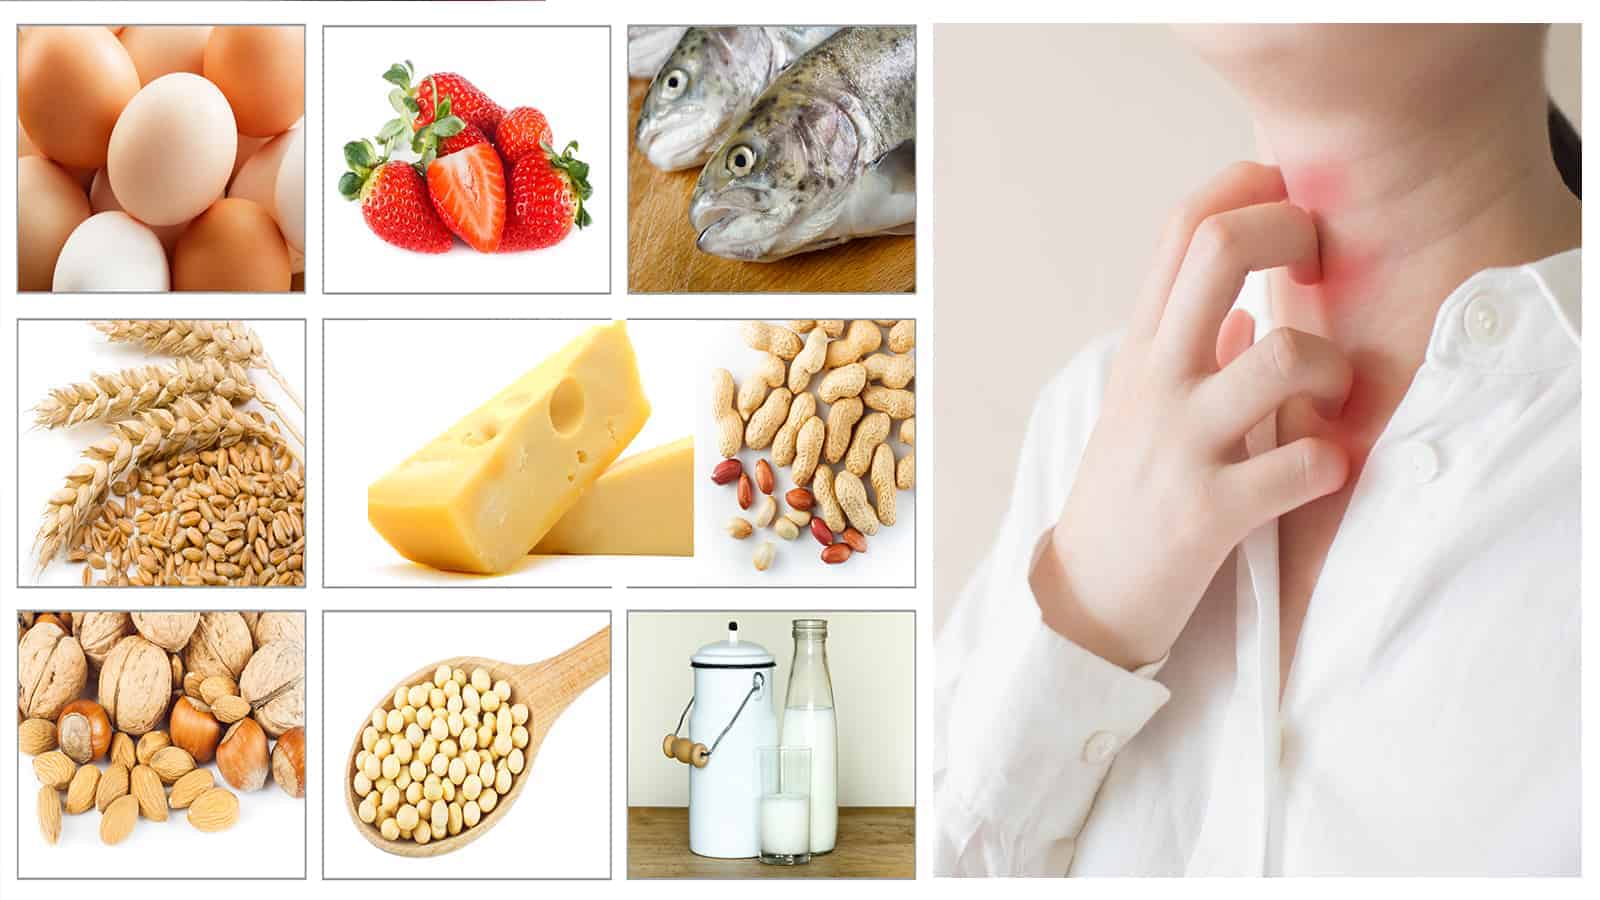 How to Use The Elimination Diet to Reveal Food Allergies